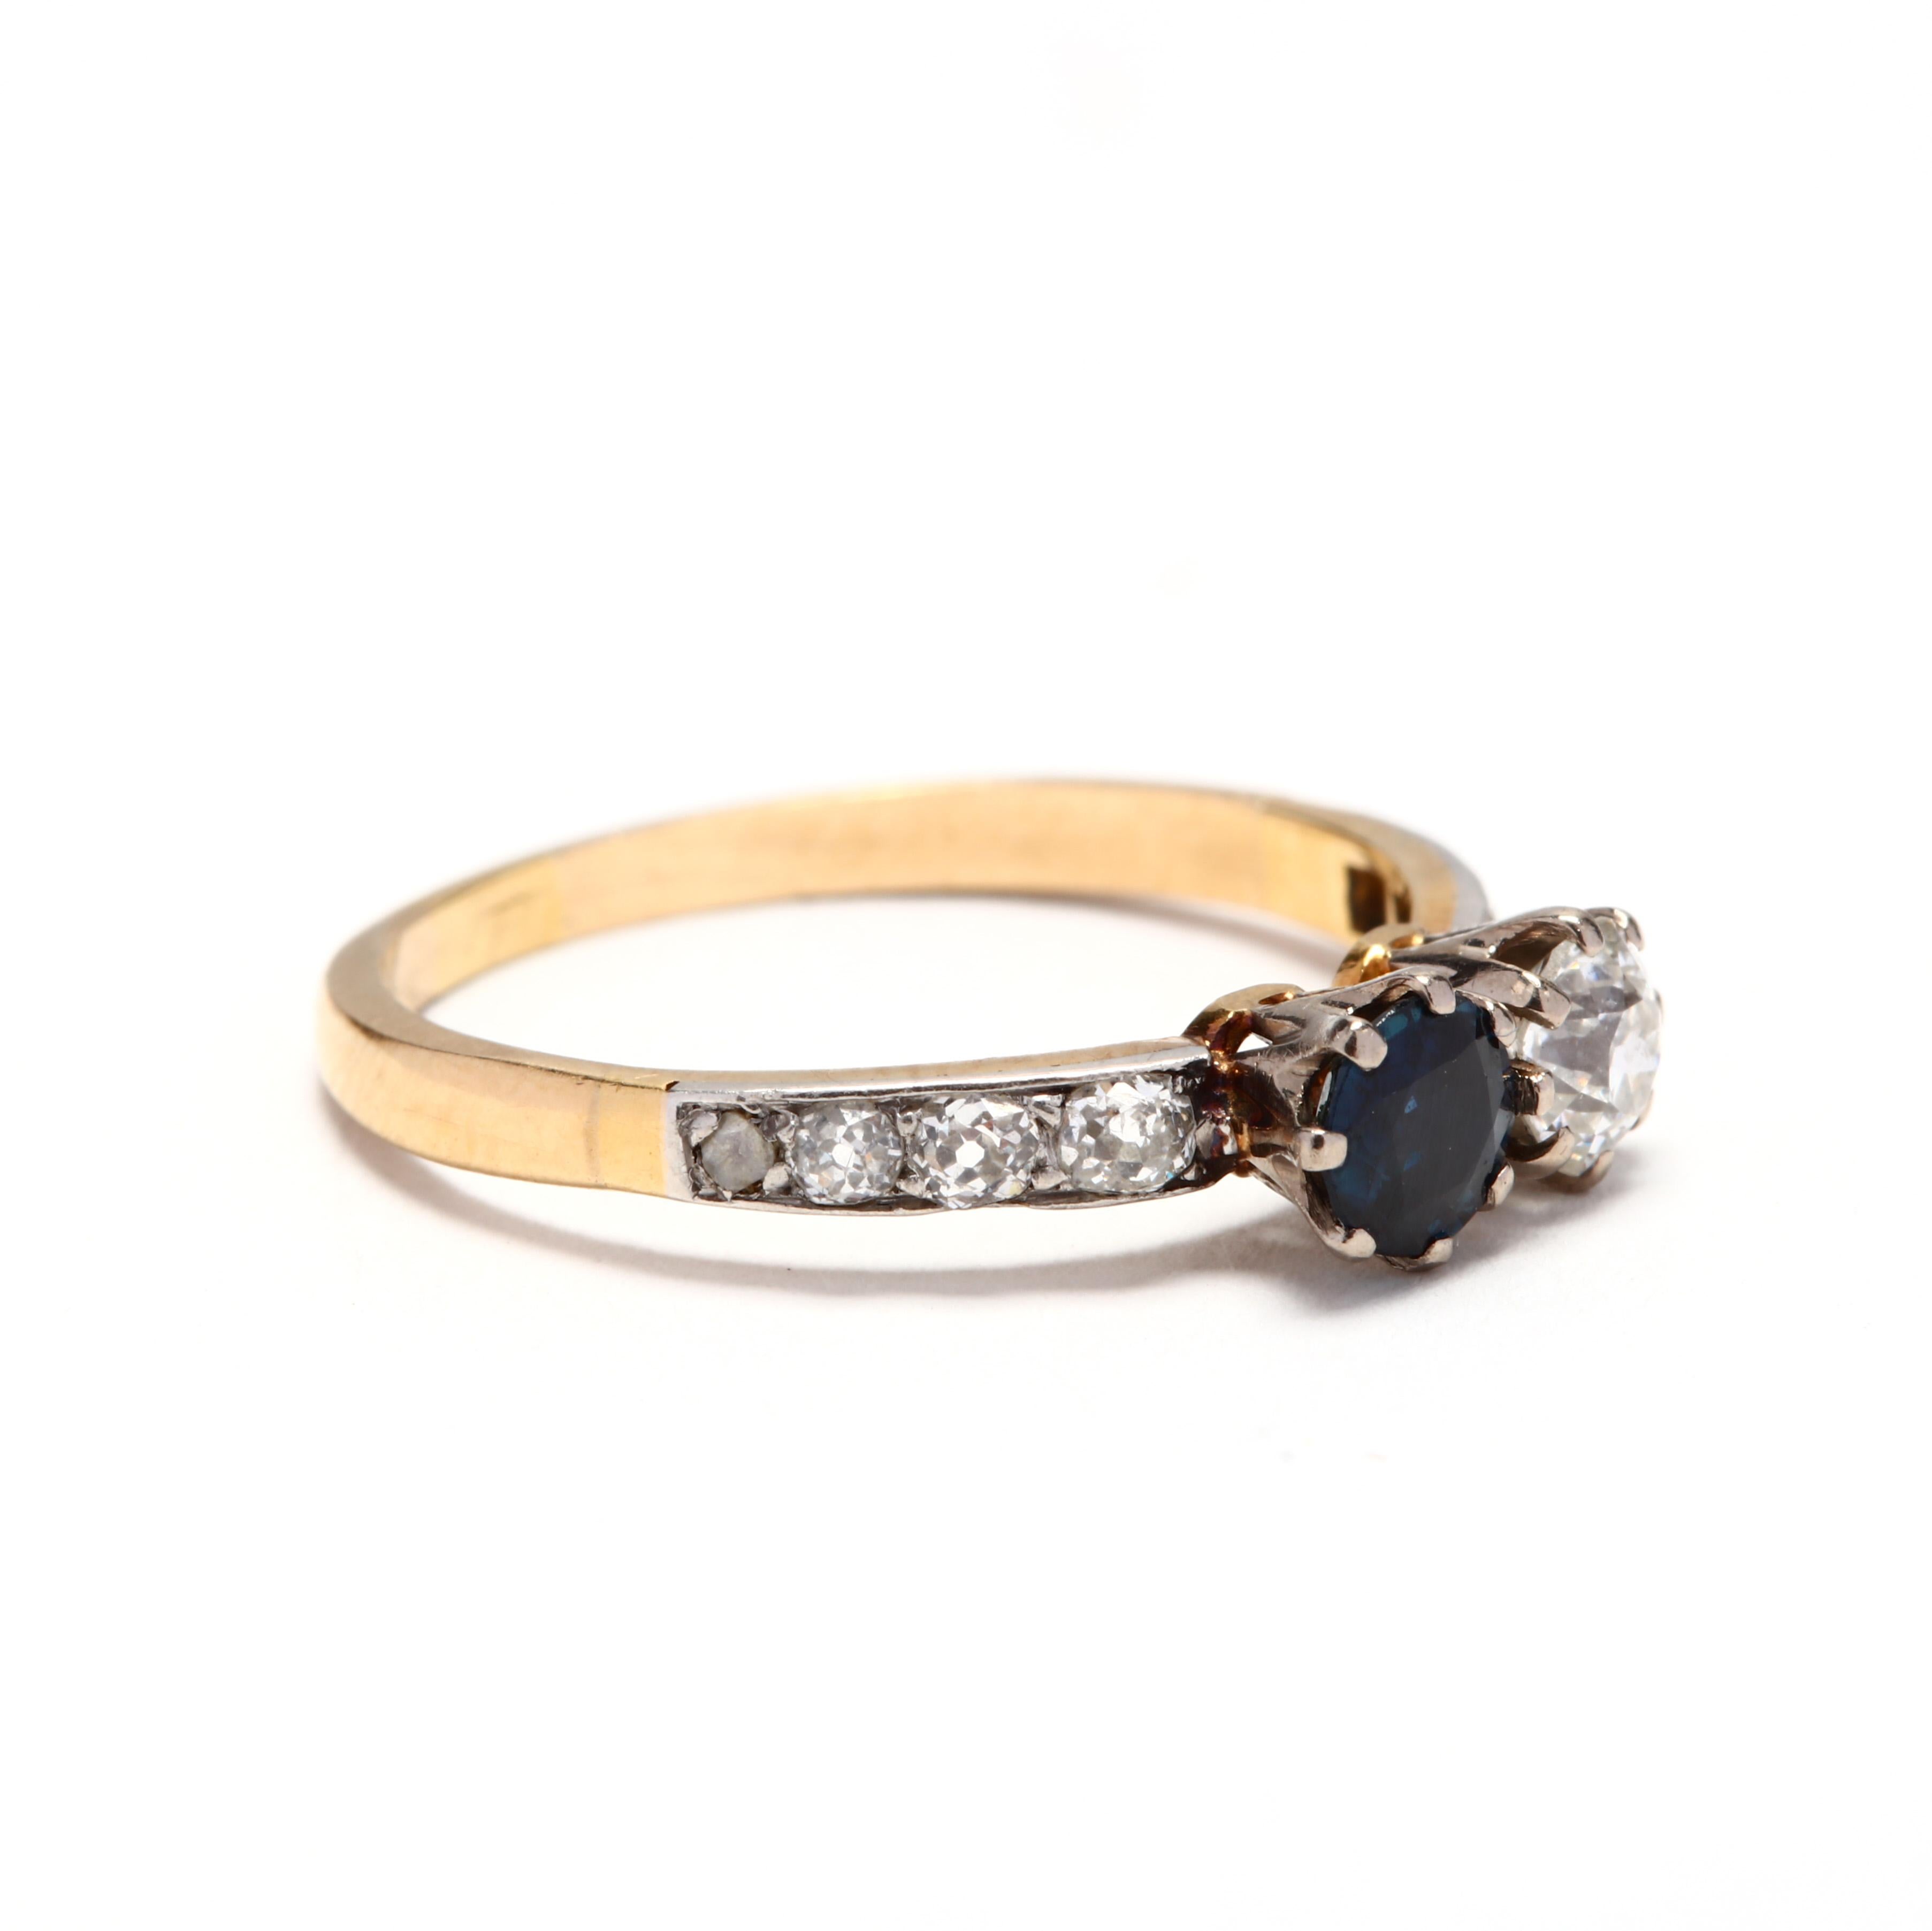 An Edwardian 14 karat yellow and white gold diamond and sapphire Toi et Moi ring. This ring features a prong set round cut sapphire and old European cut diamond set side by side and with old rose cut diamonds on the shank.

Stones:
- diamonds, 9